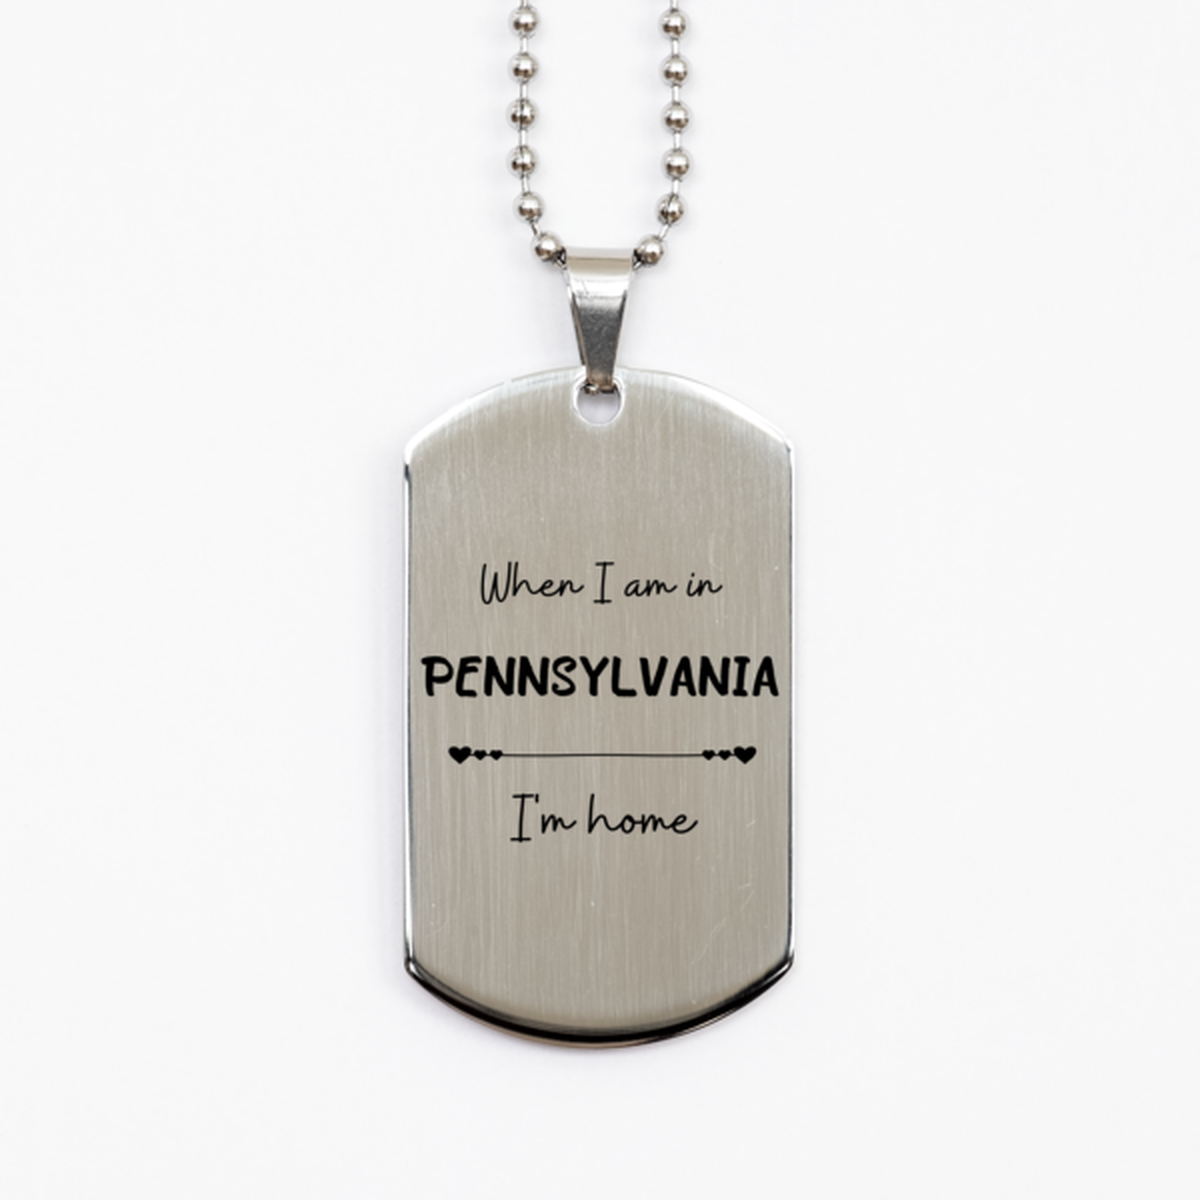 When I am in Pennsylvania I'm home Silver Dog Tag, Cheap Gifts For Pennsylvania, State Pennsylvania Birthday Gifts for Friends Coworker